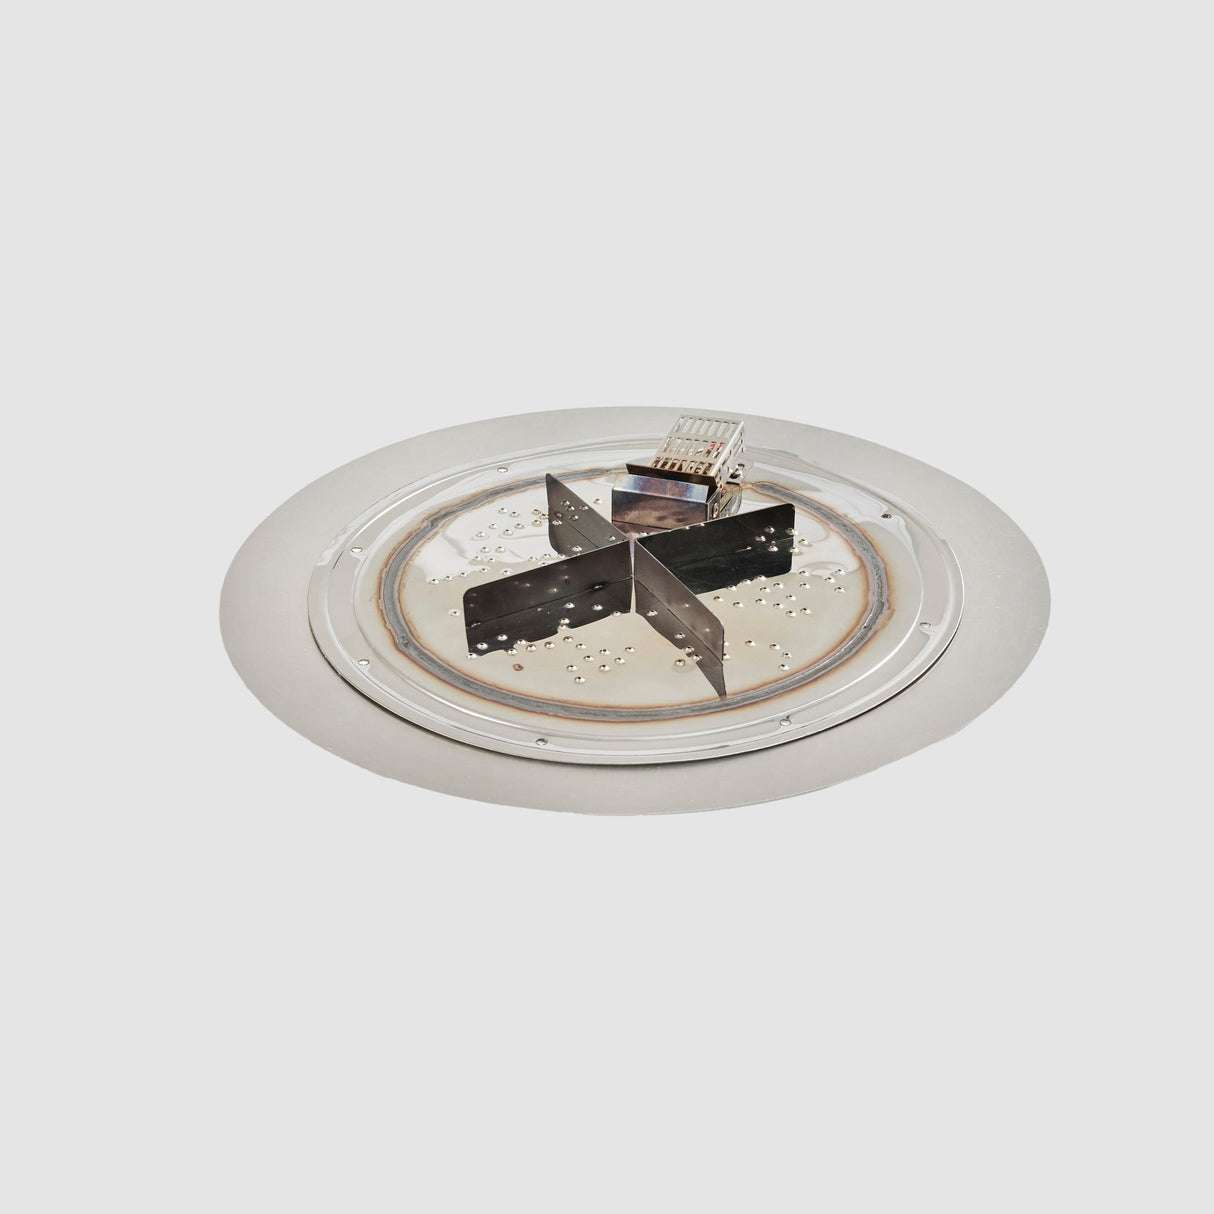 The 20" Crystal Fire Plus Round Gas Burner Insert and Plate Kit on a grey background